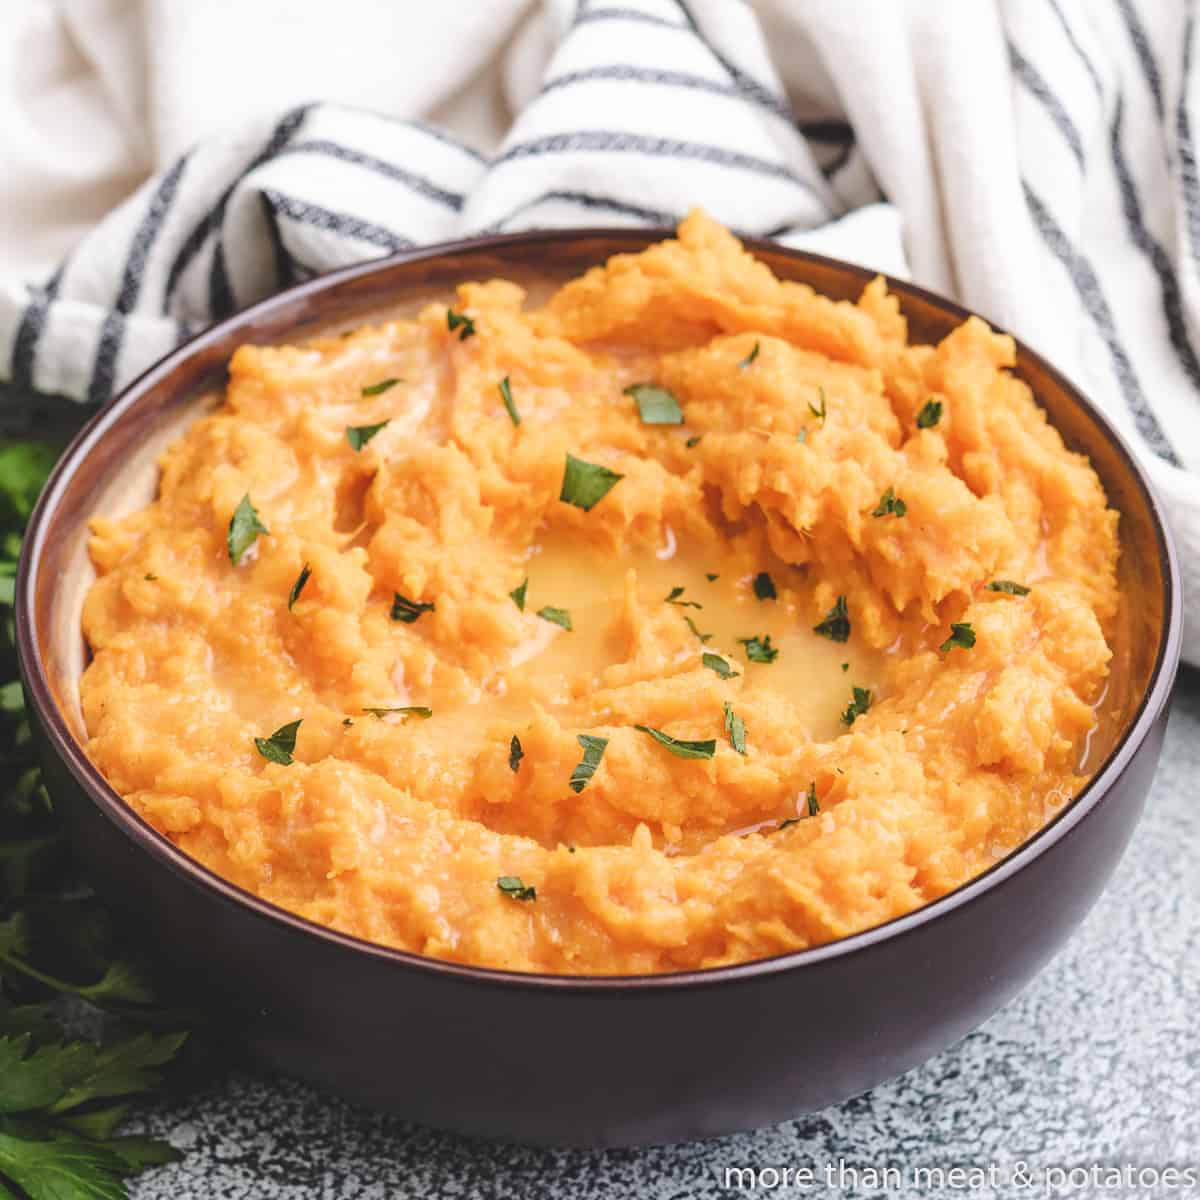 Mashed sweet potatoes in a bowl garnished with parsley.